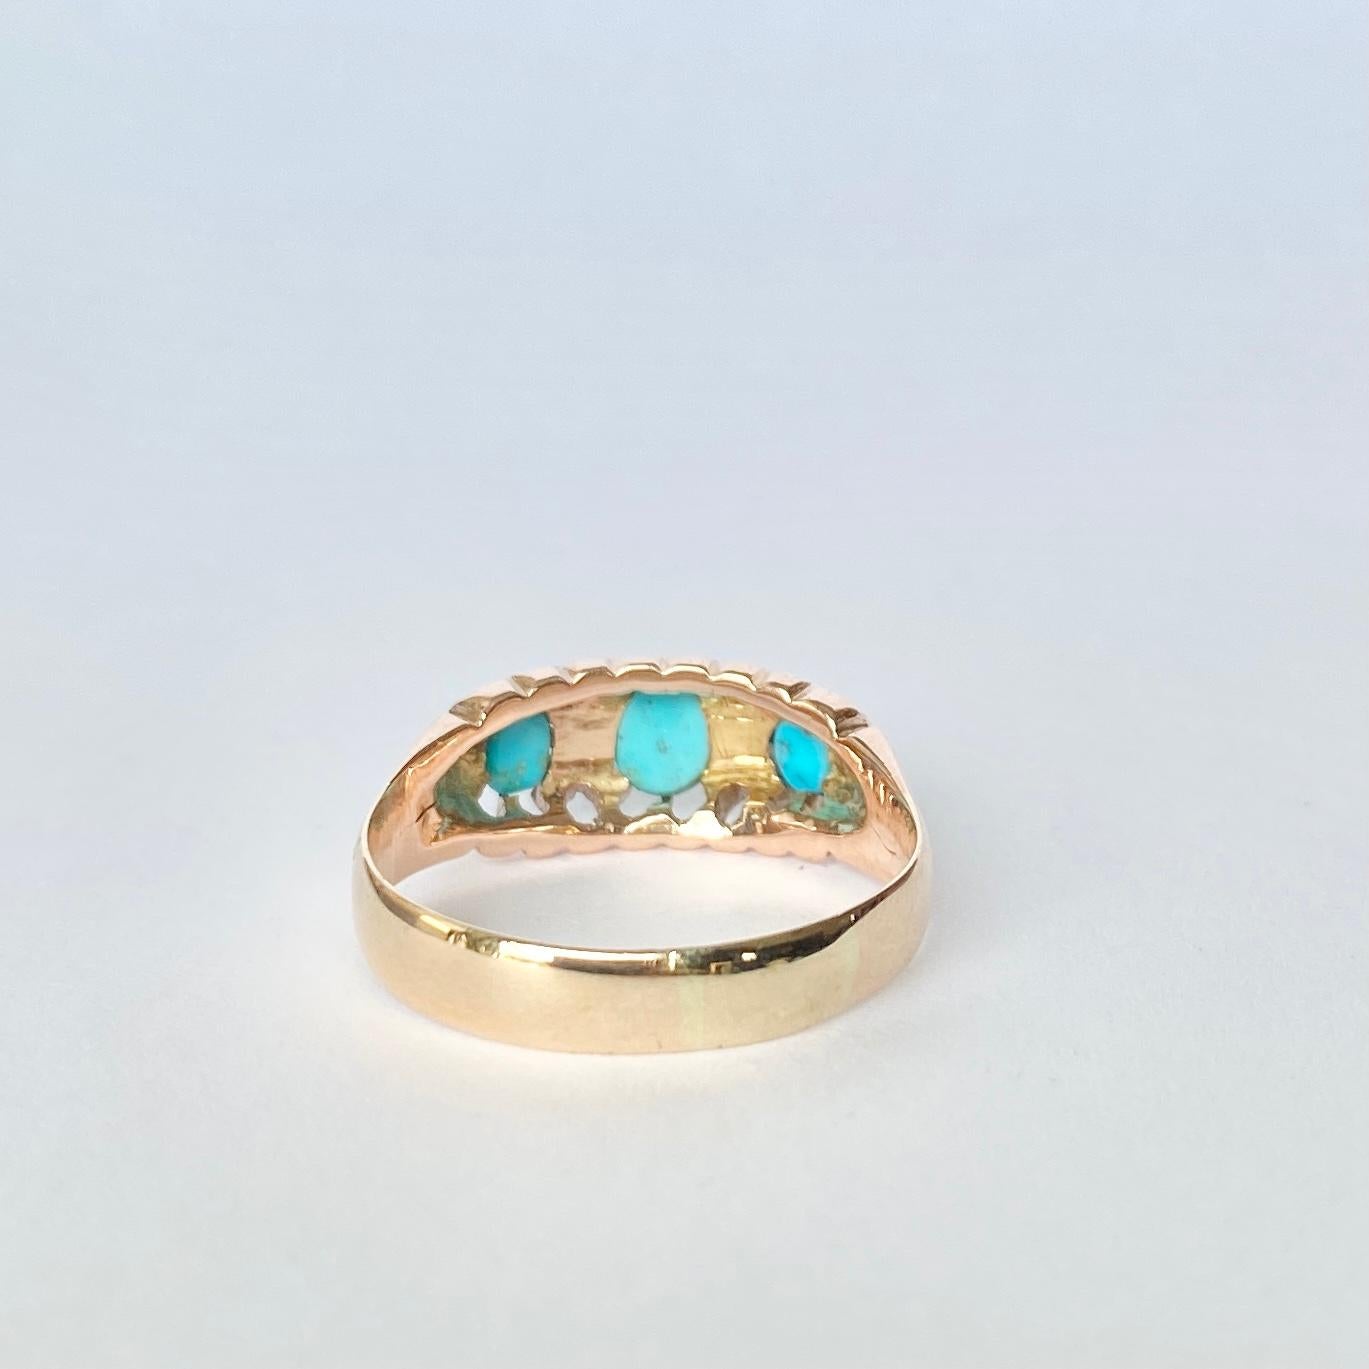 This gorgeous Edwardian three stone holds a trio of bright blue turquoise stones and in between them sit a pair of bright, round sparkling diamond points. Fully hallmarked Birmingham 1886.

Ring Size: R 1/2 or 8 3/4 
Width: 8mm

Weight: 3.1g